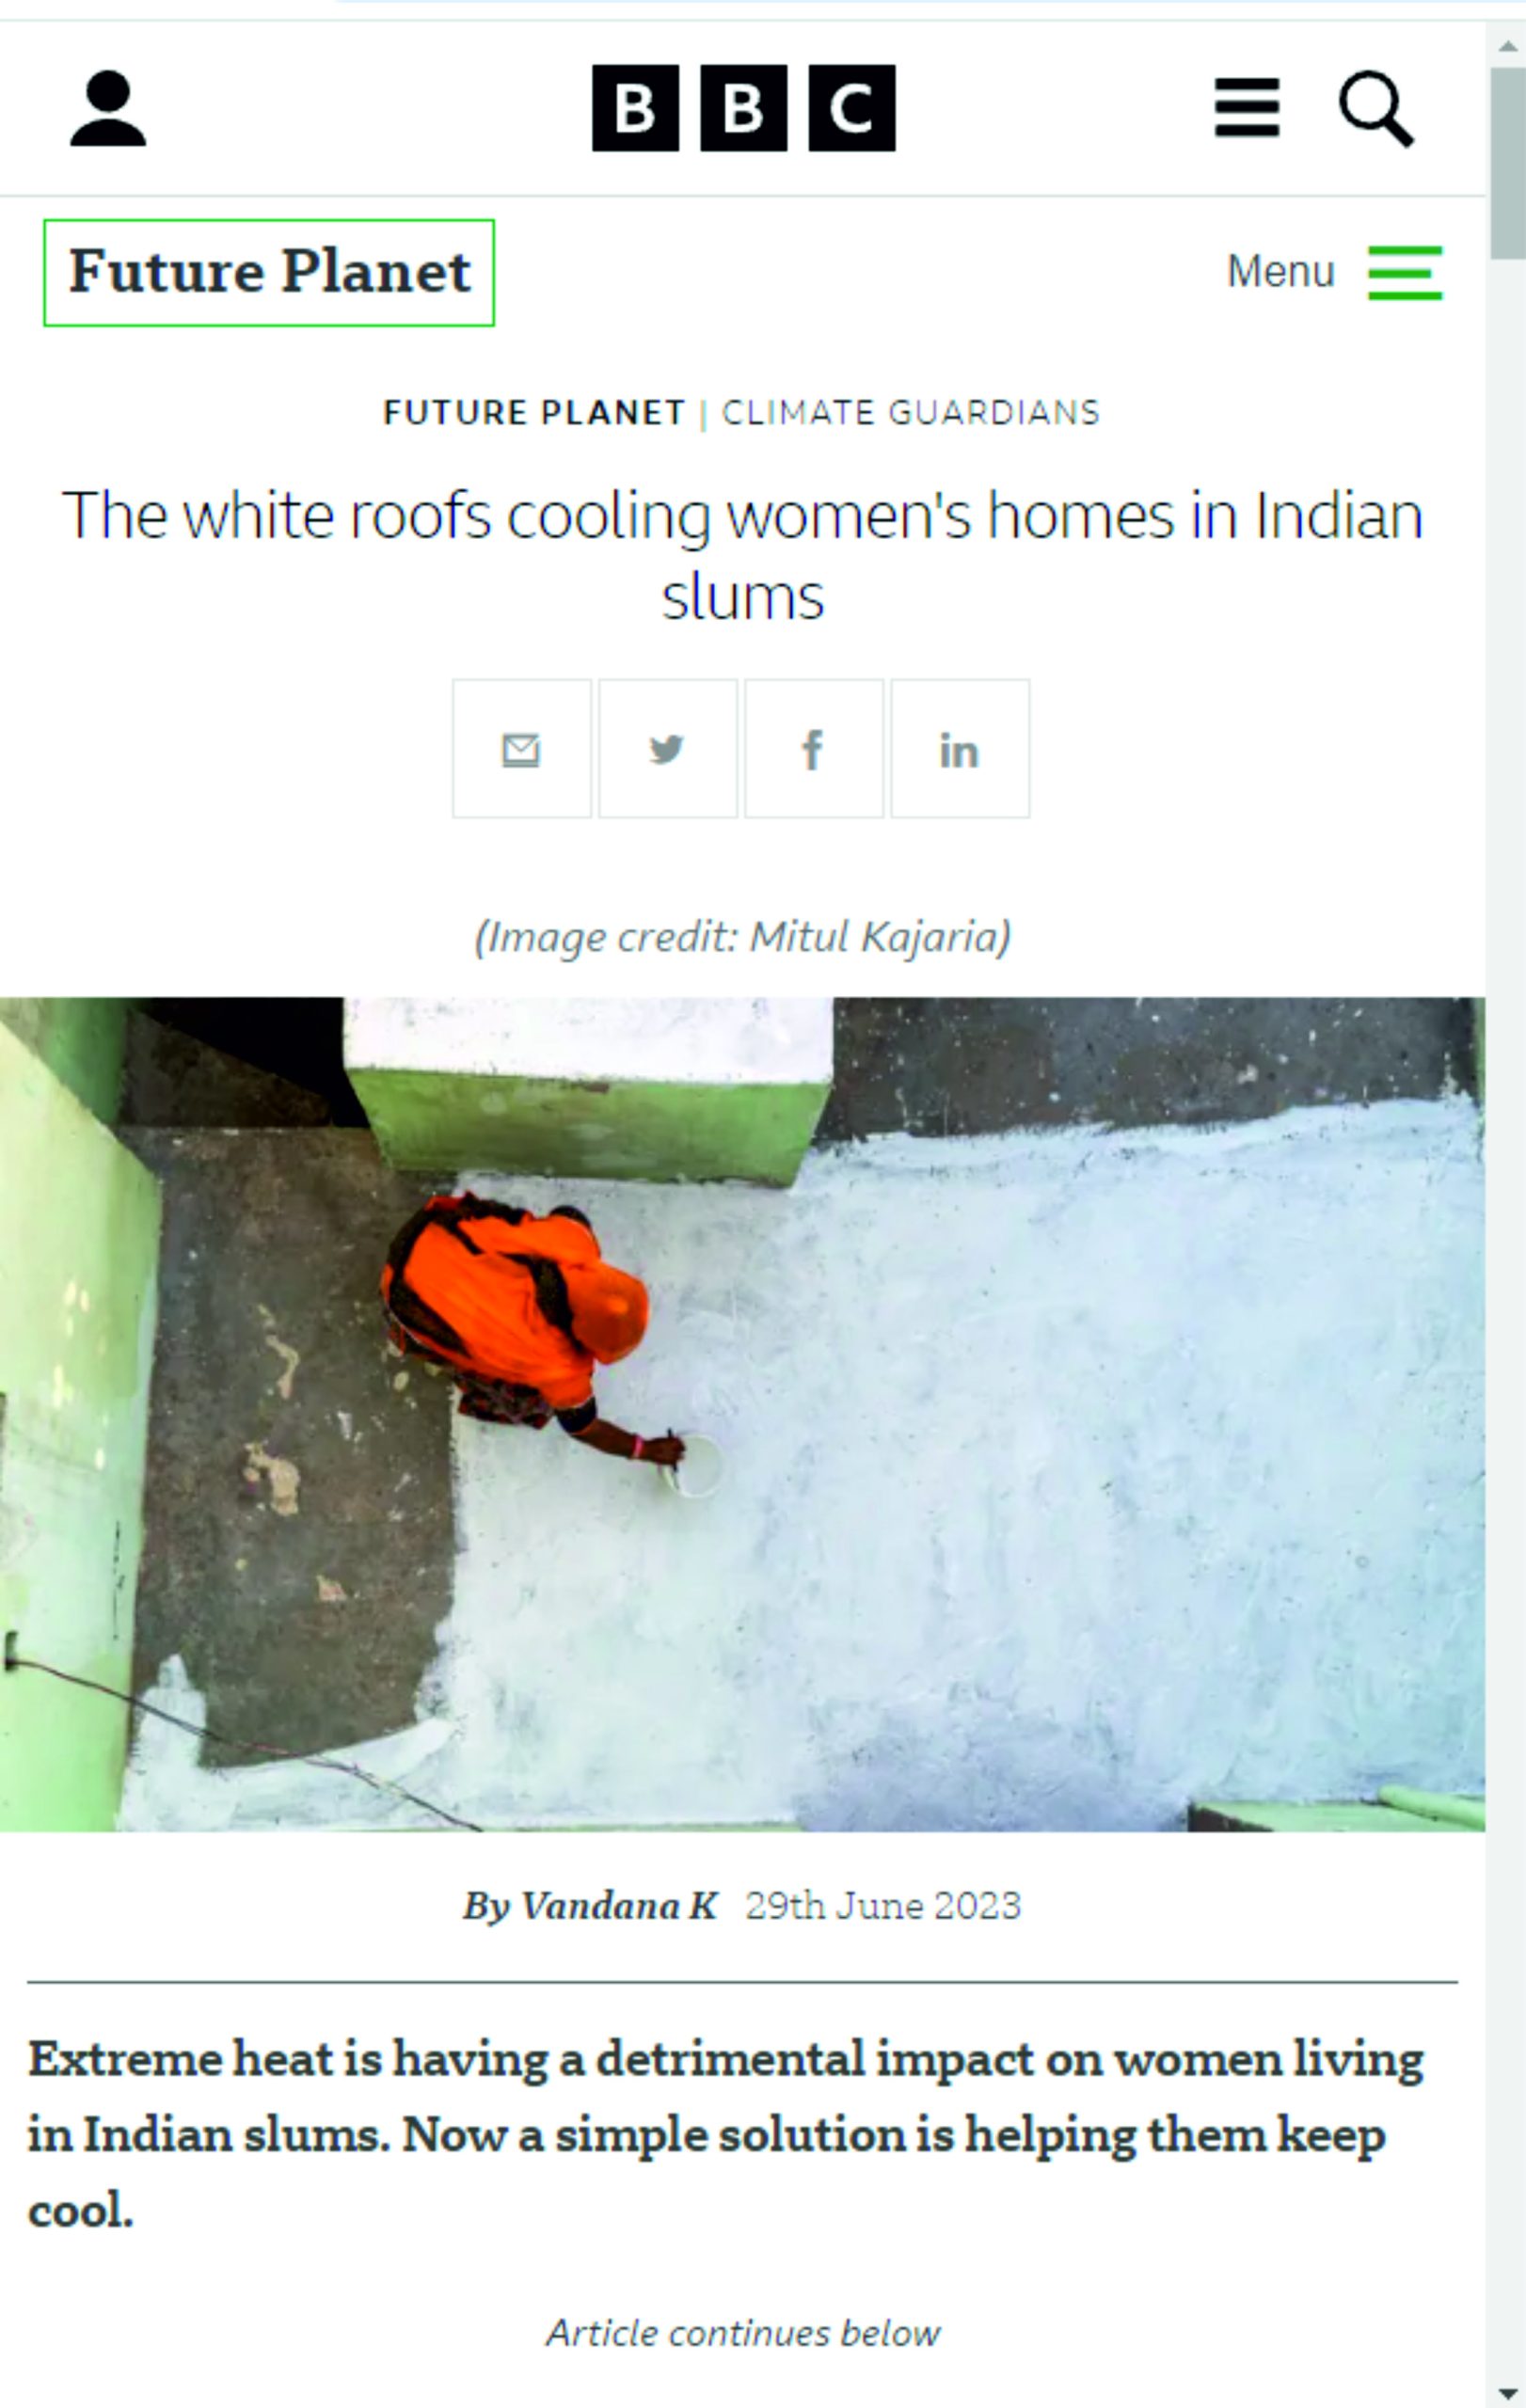 The white roofs cooling women’s homes in Indian slums